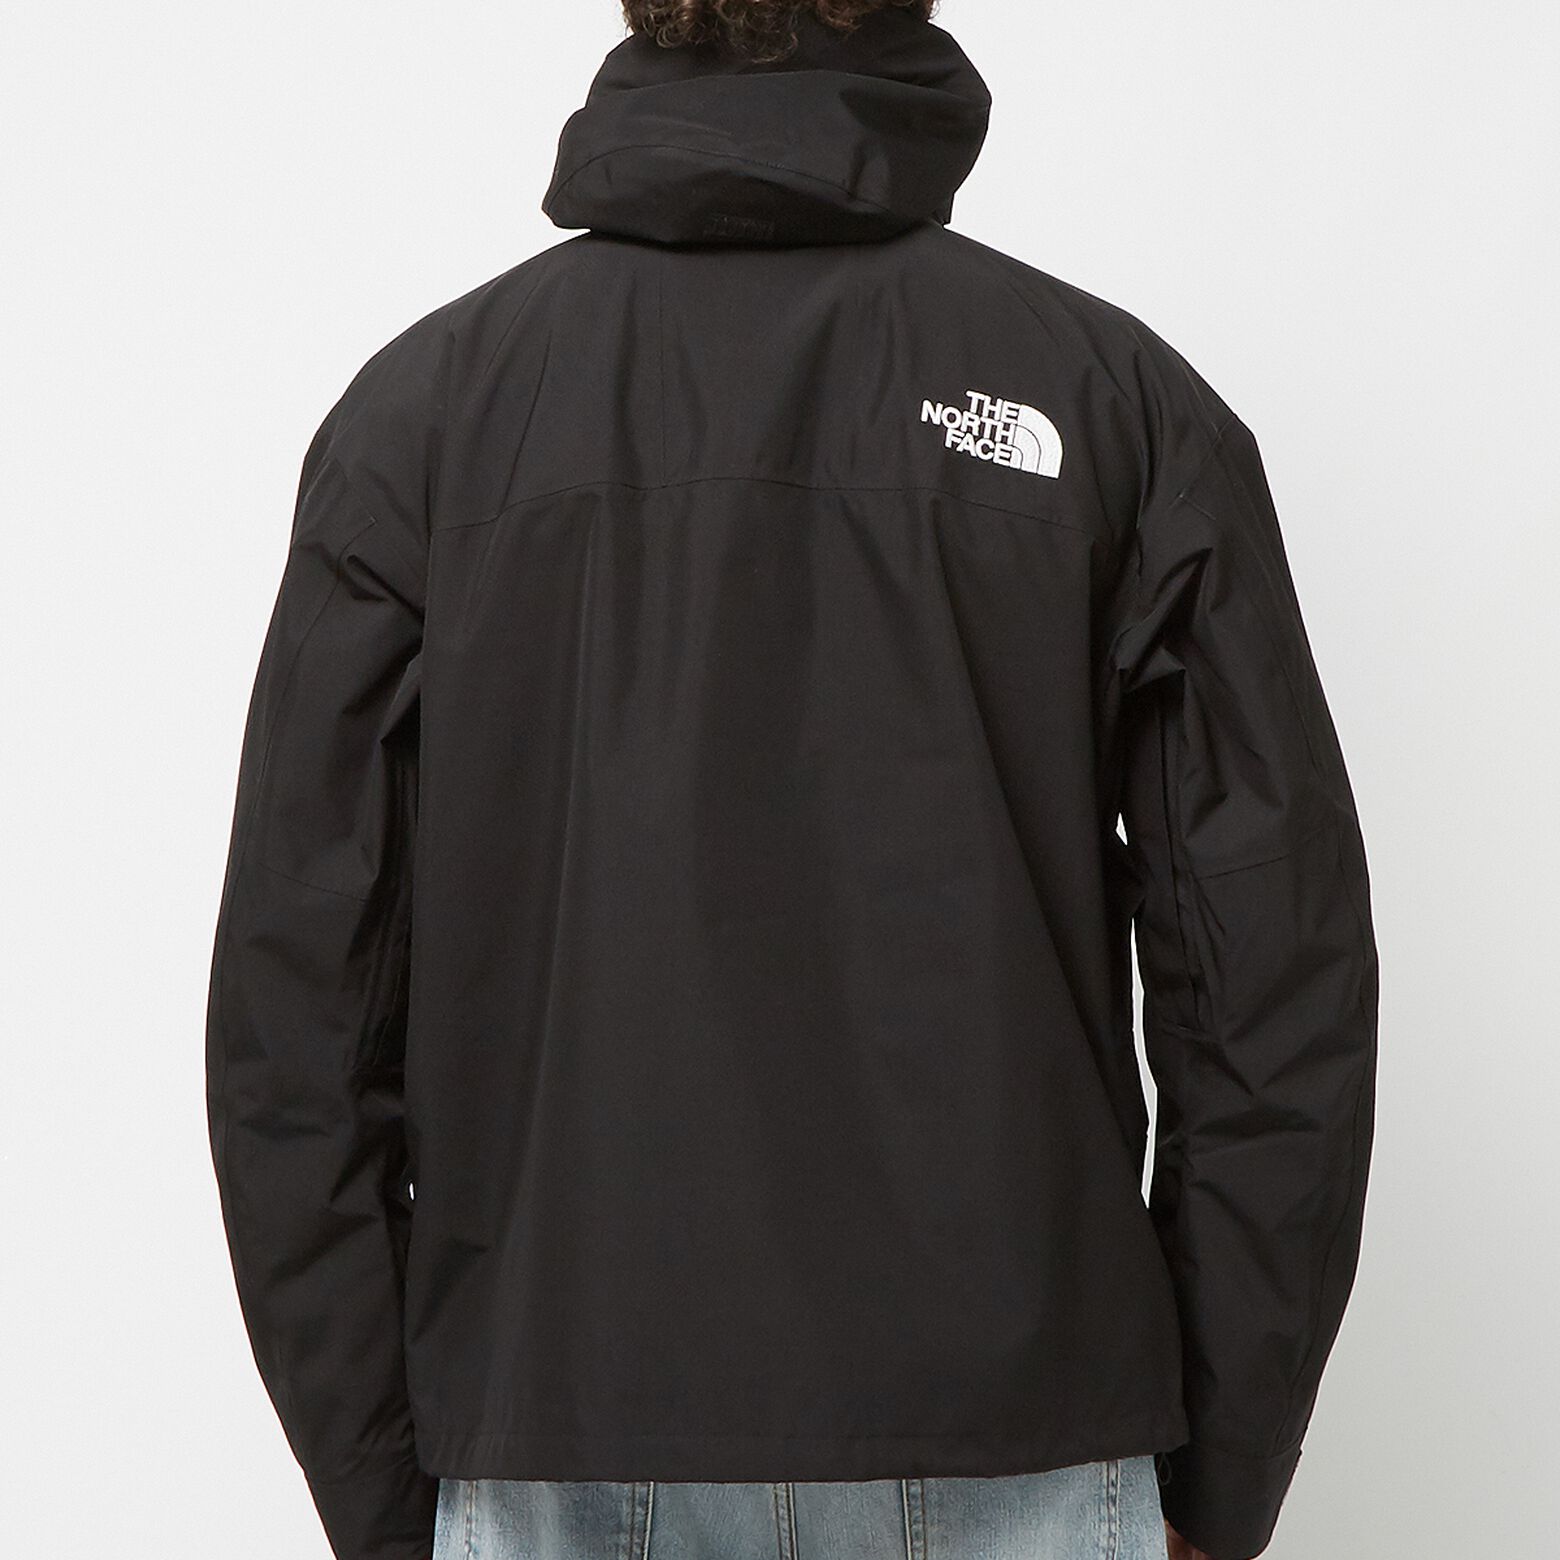 The North Face Gore-Tex Montain Jacket